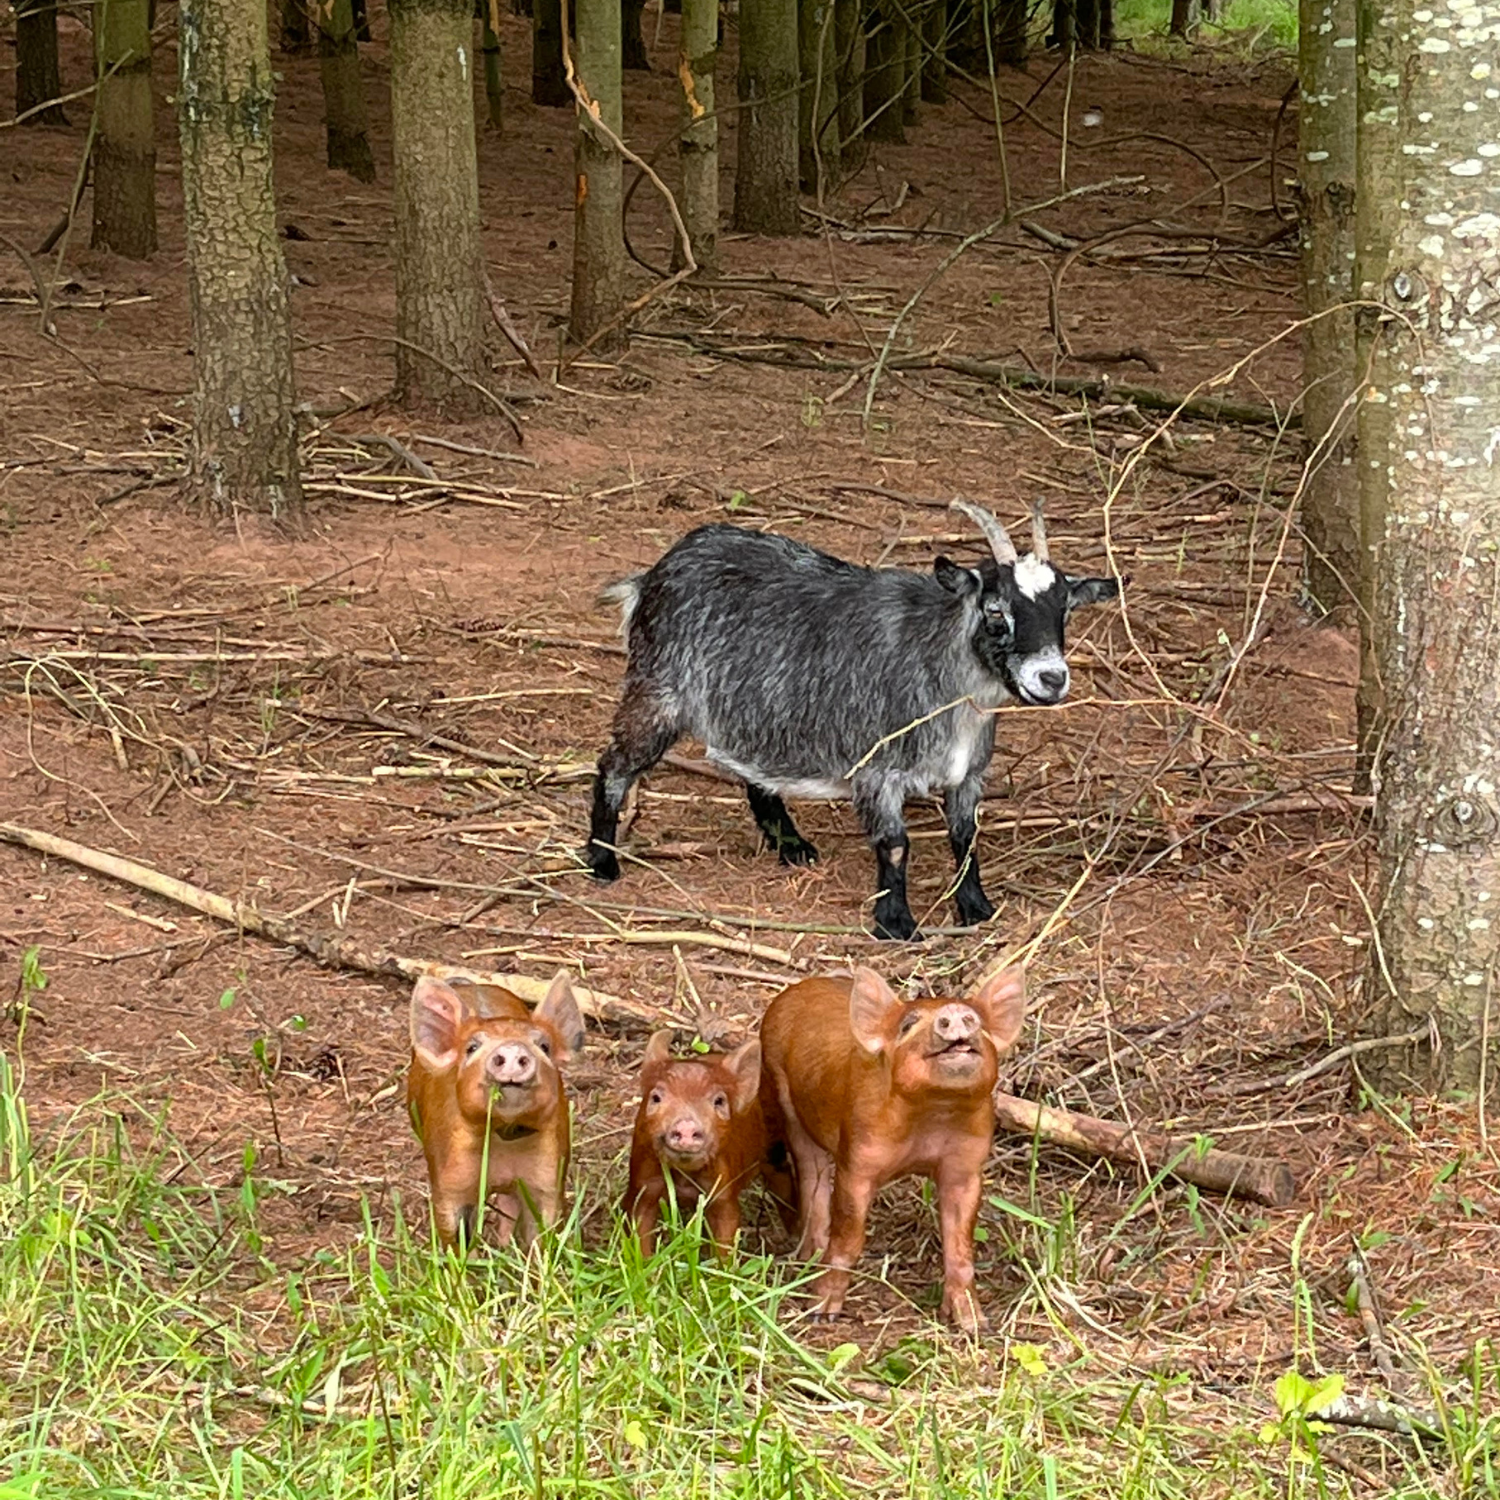 Next Happening: Goats and piglets are here!